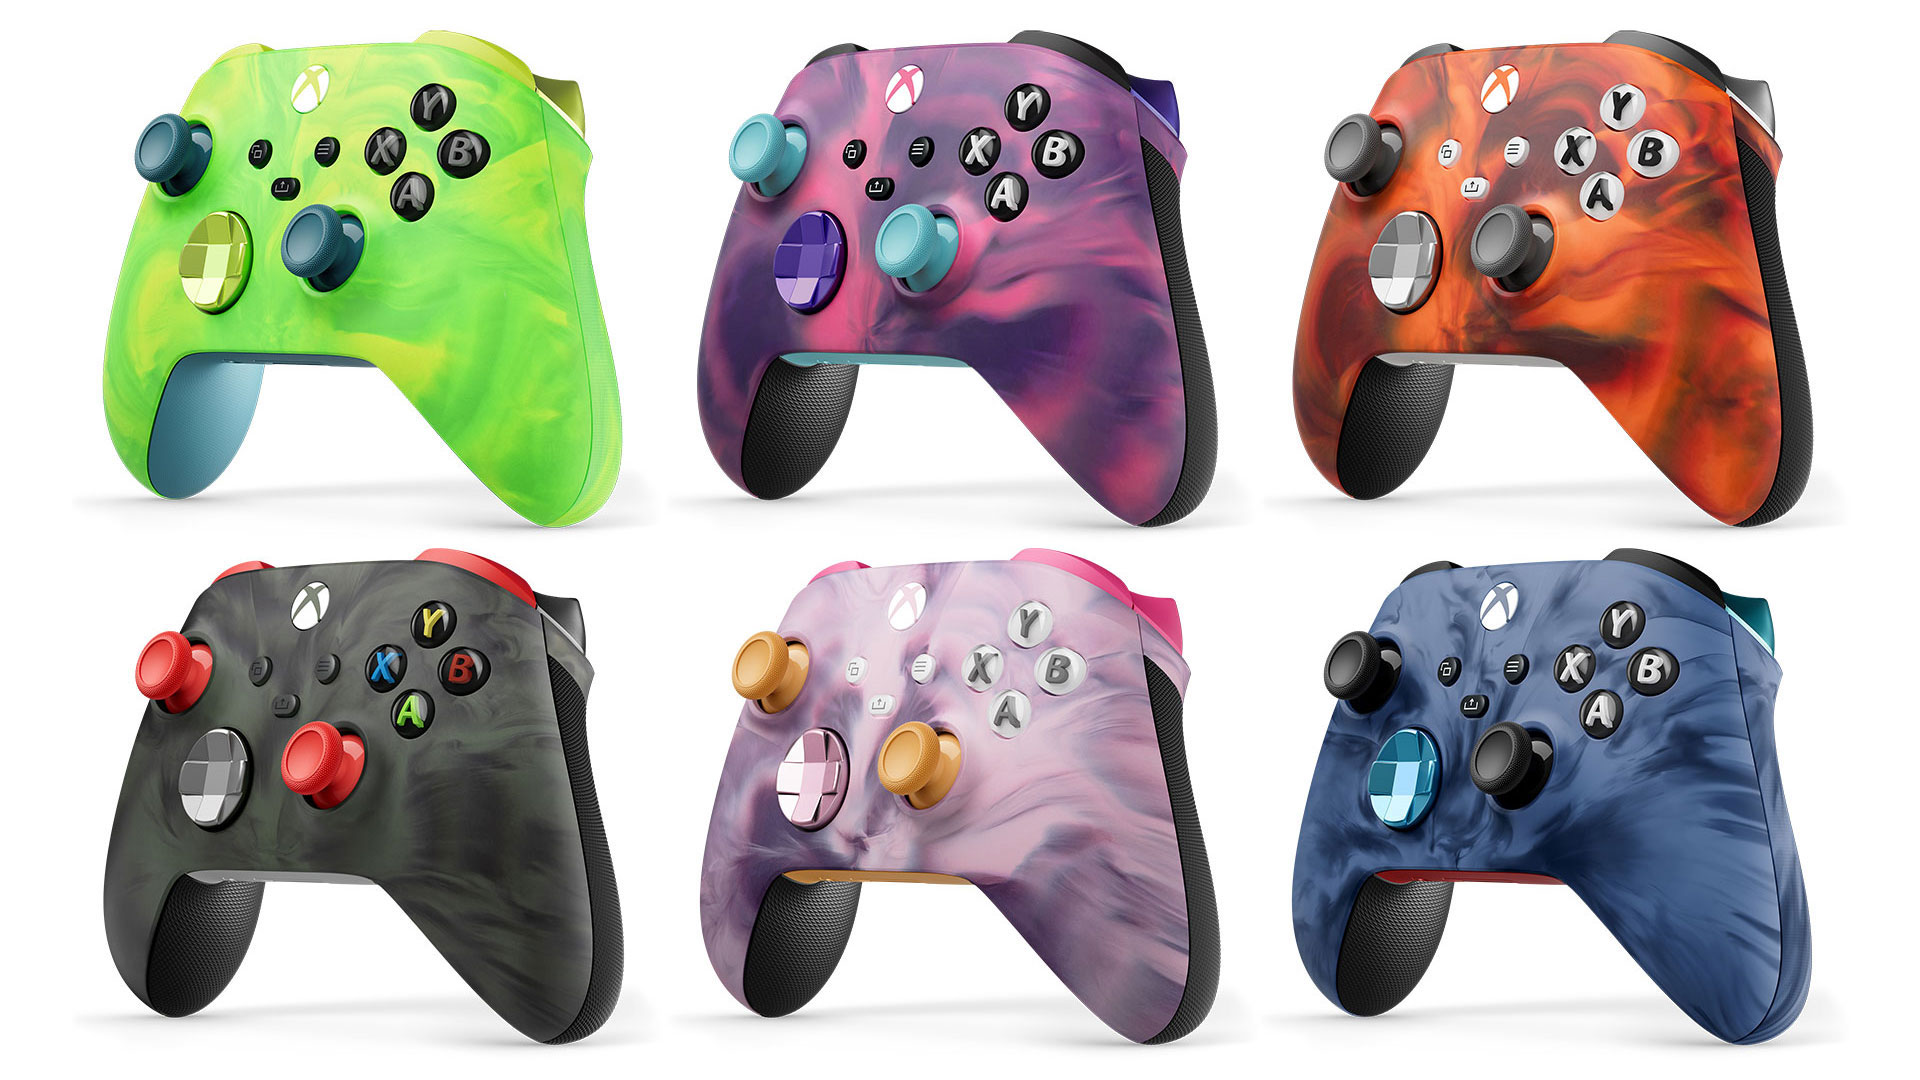 The Vapor Xbox Wireless Controller Collection features the best-looking controllers we've seen yet